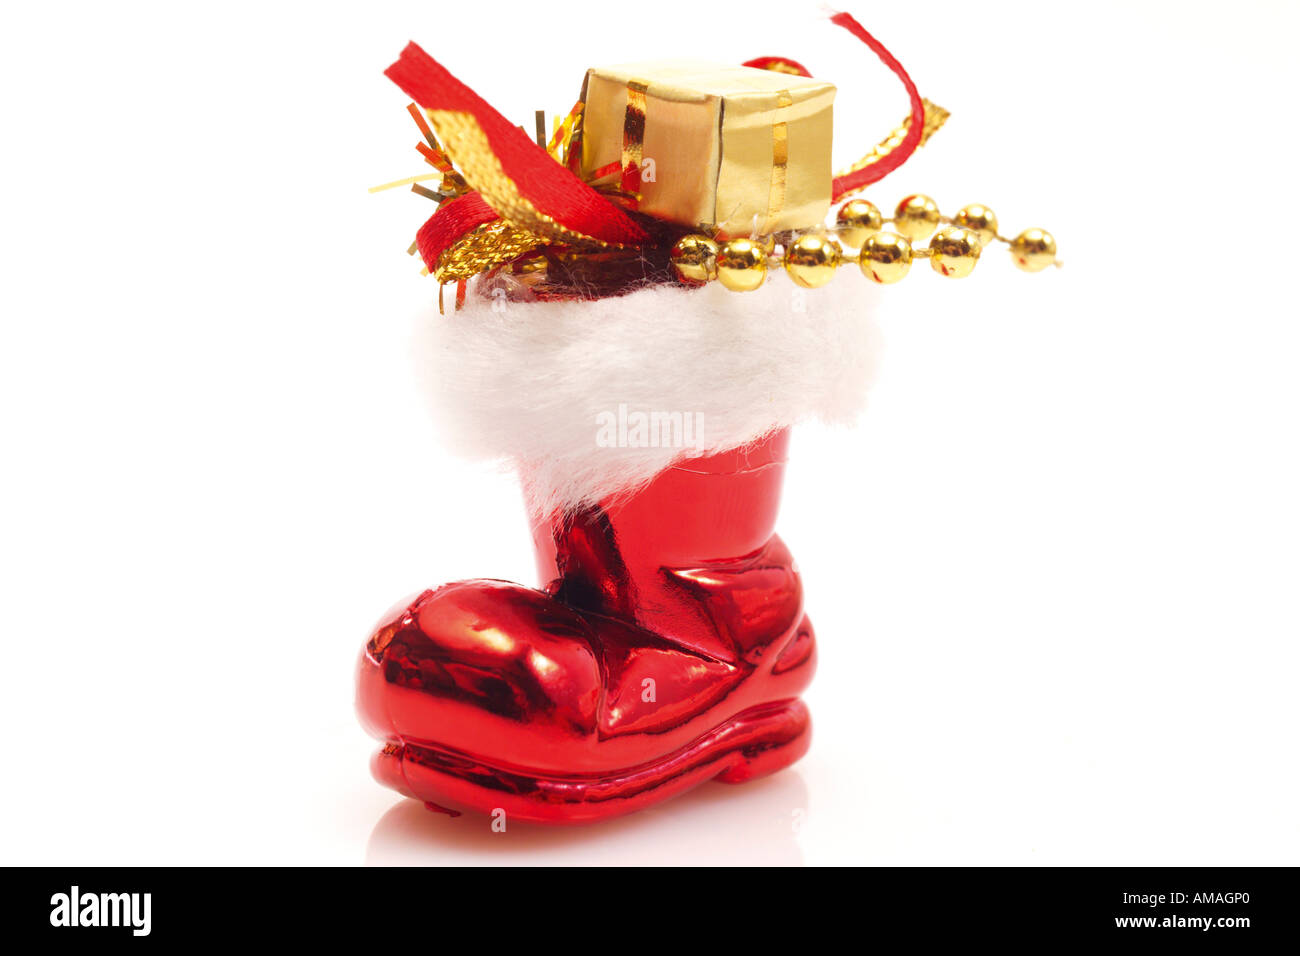 Santa Claus boot with gifts, close-up Stock Photo